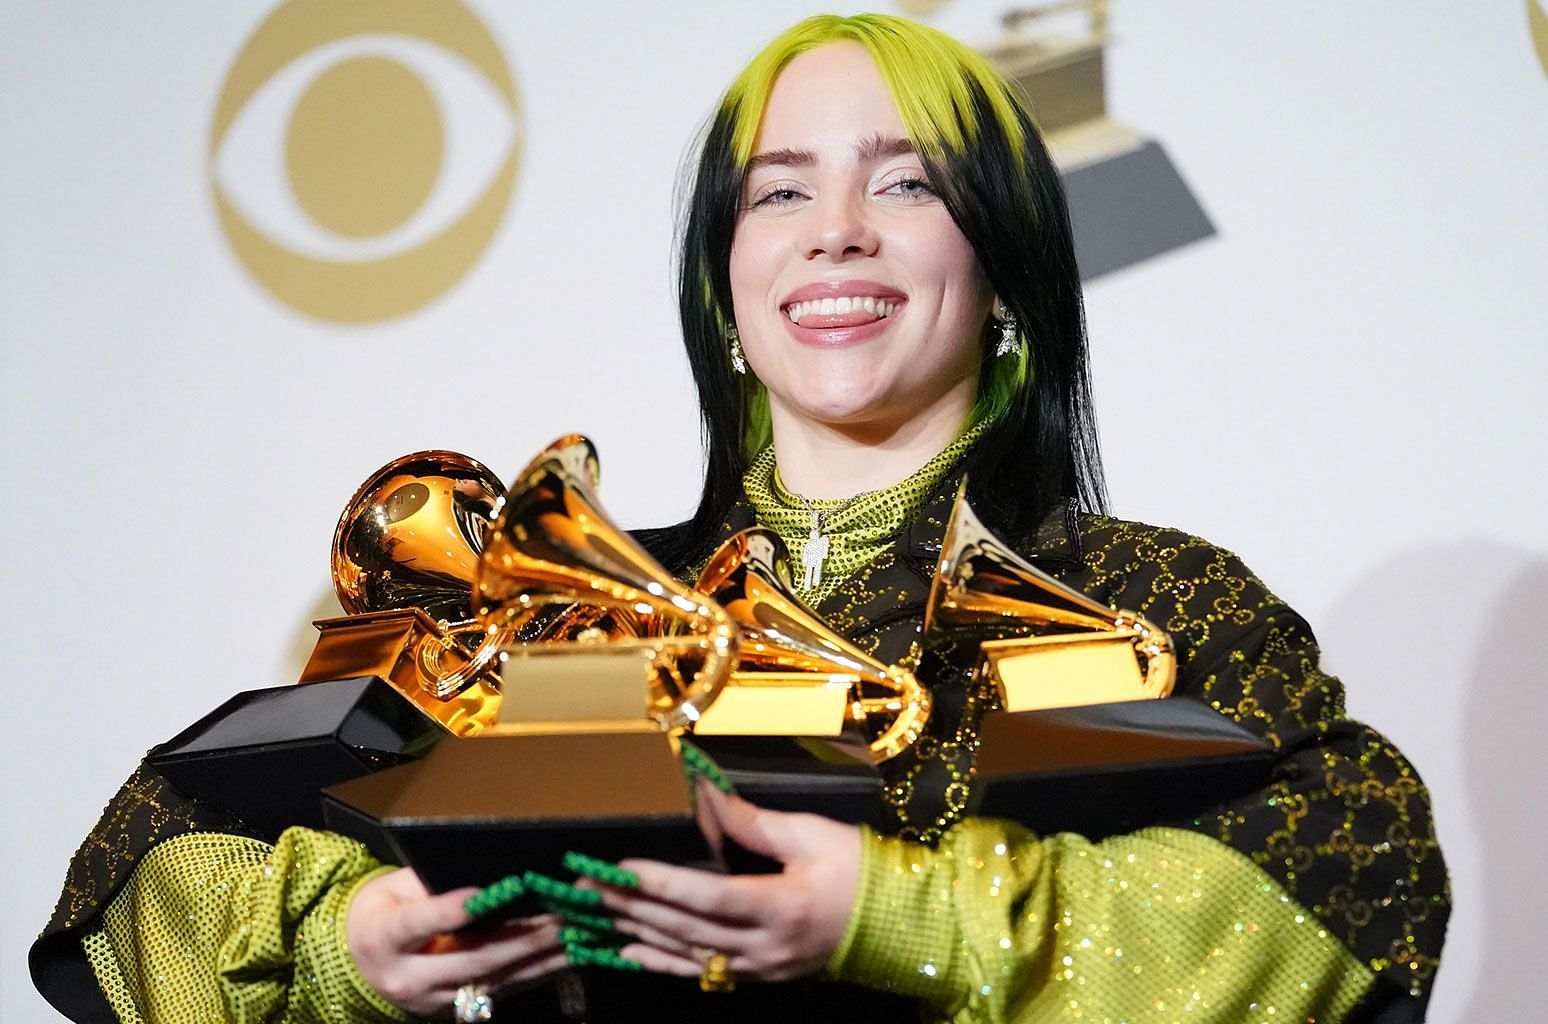 "I still have side effects" Billie Eilish believes she would have died